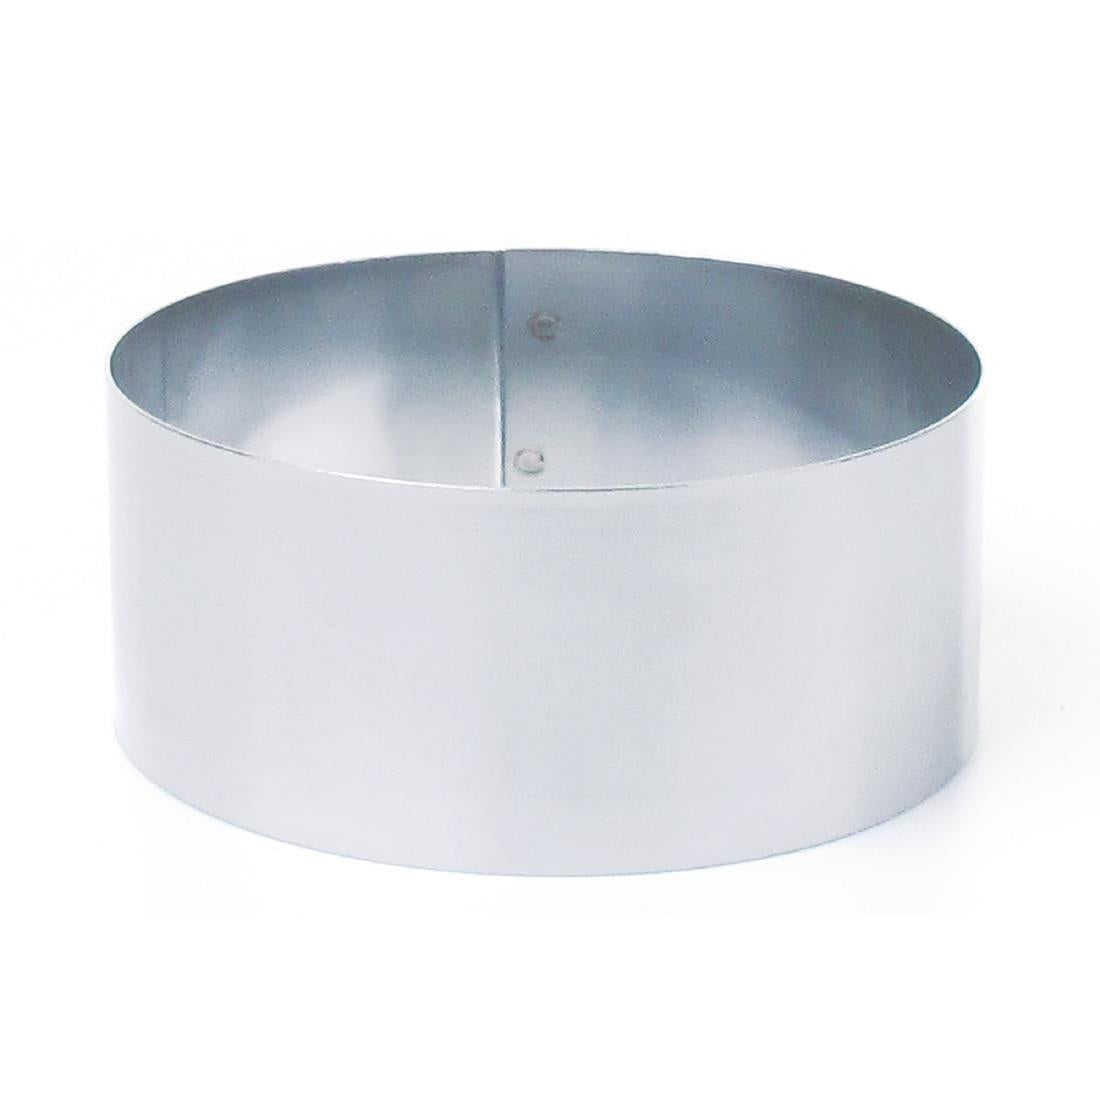 Mafter Stainless Steel Mousse Ring 140 x 60mm JD Catering Equipment Solutions Ltd